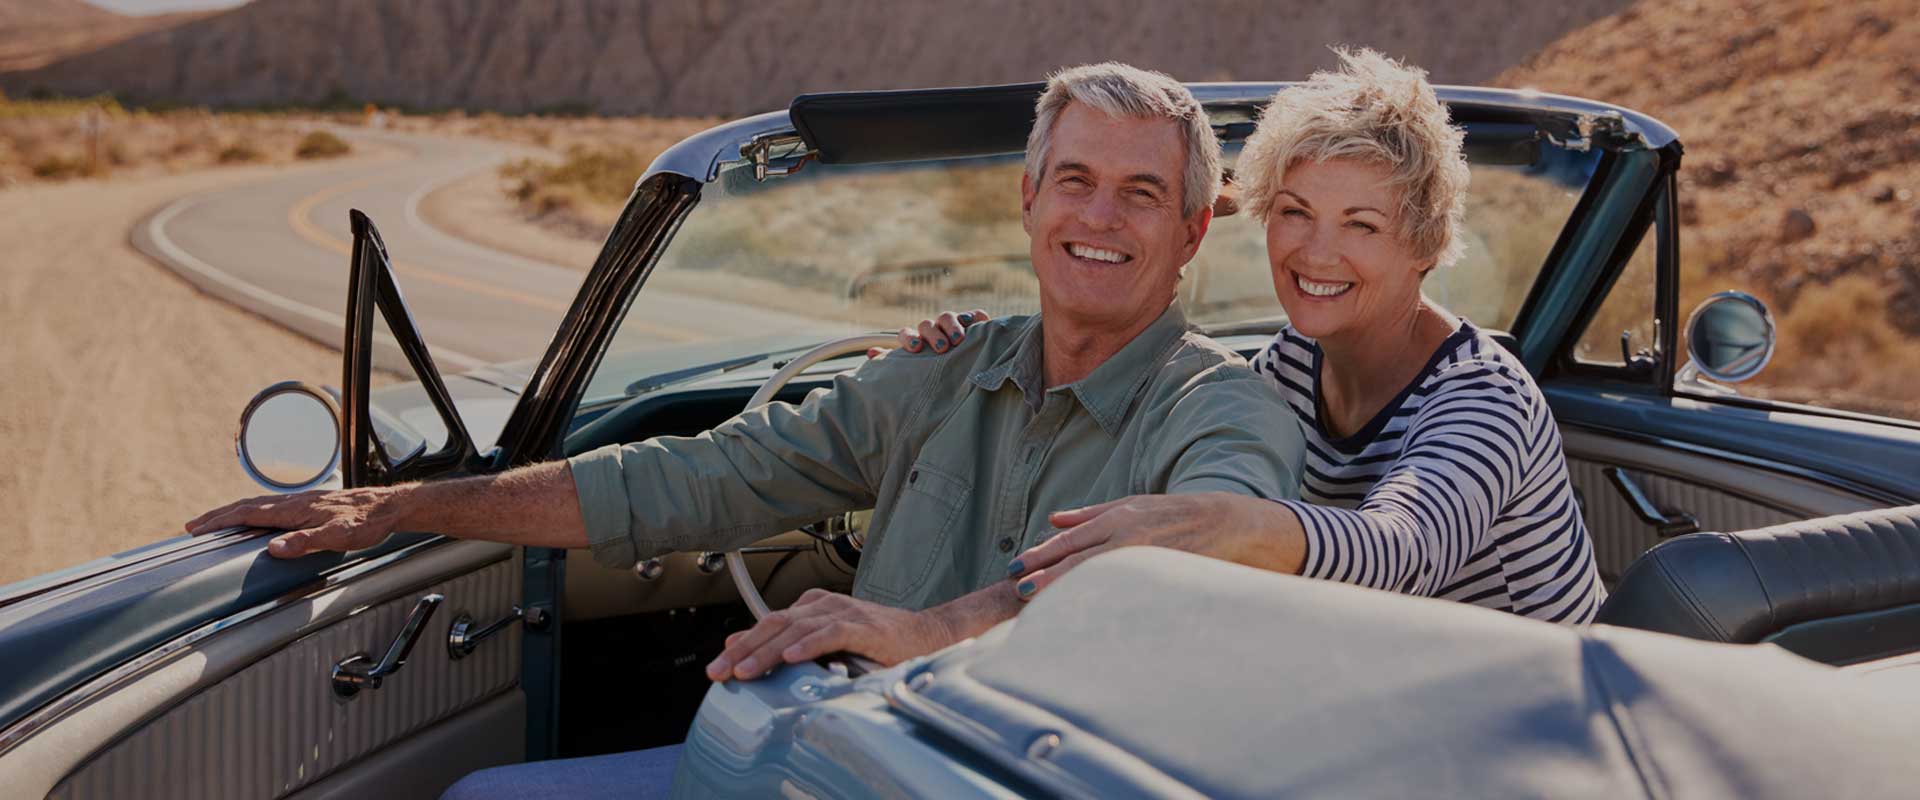 Smiling couple in car